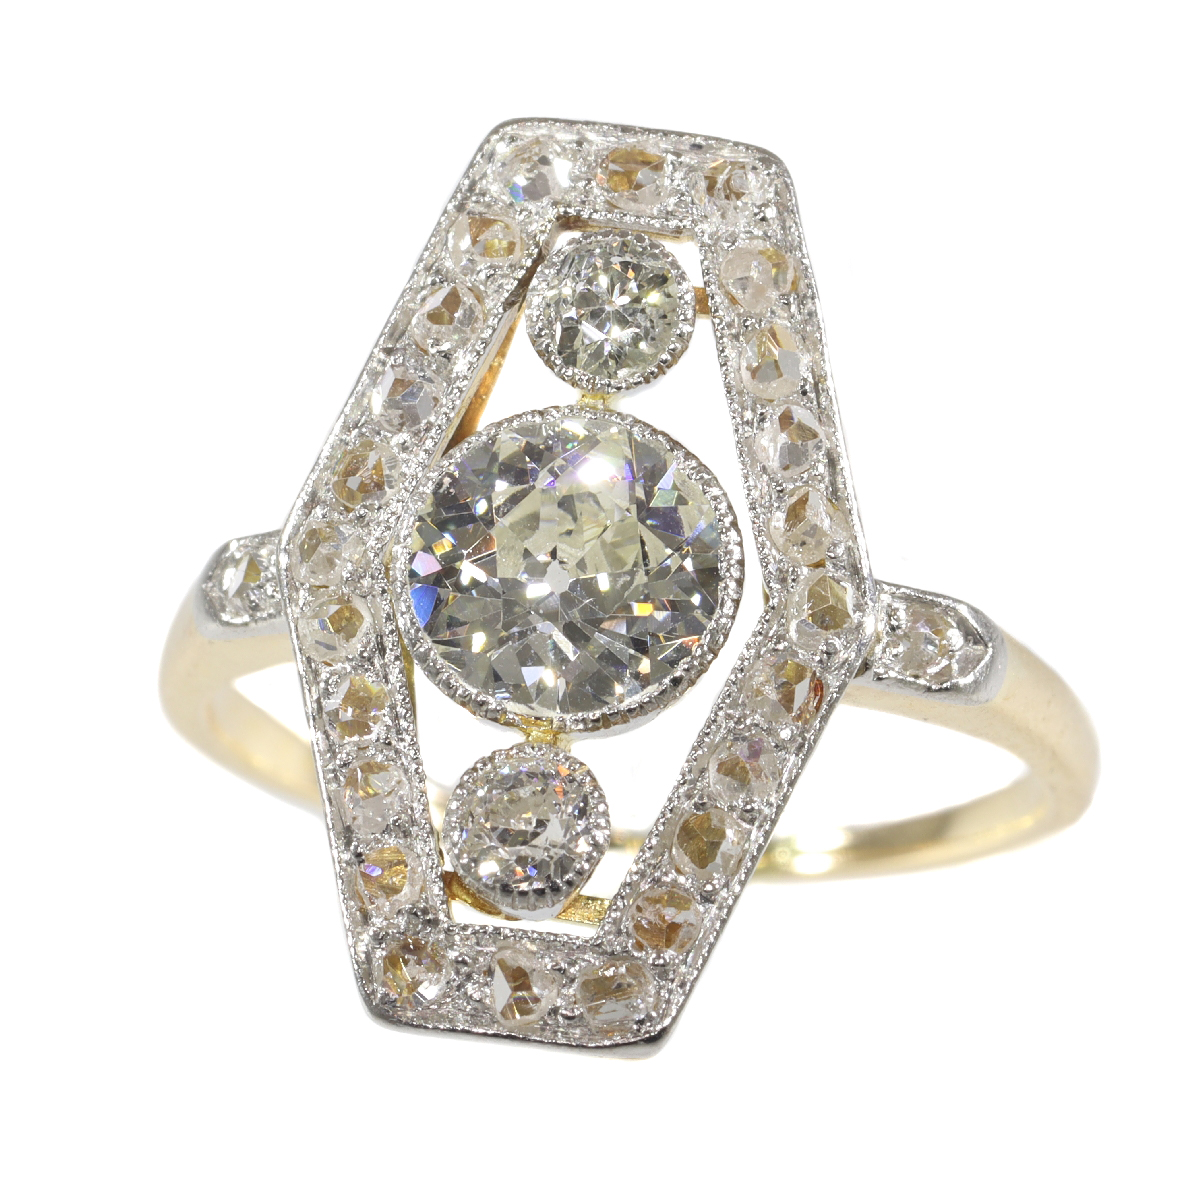 Vintage diamond engagement ring from the Belle Epoque Era